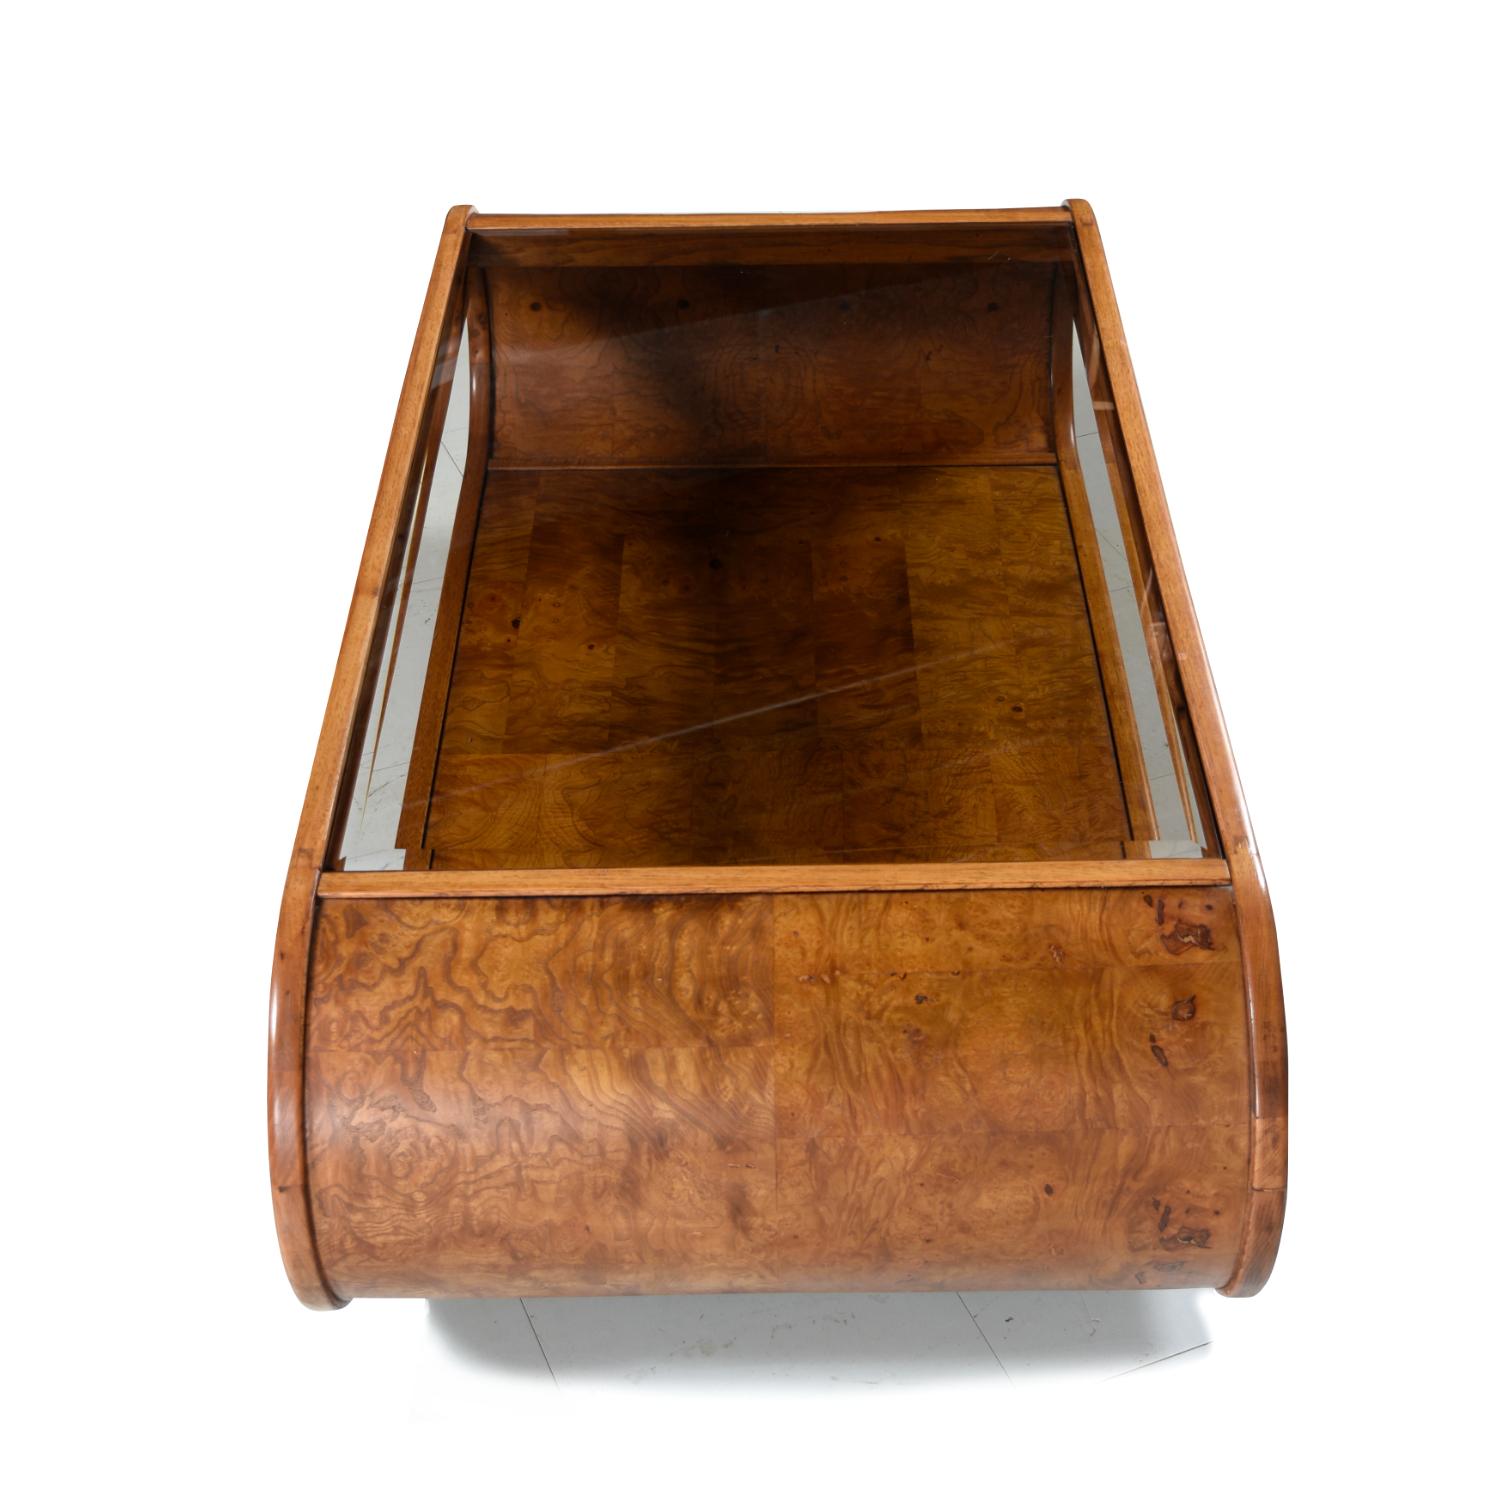 Late 20th Century Maple Burl Coffee Table with Beveled Smoked Glass, circa 1970s